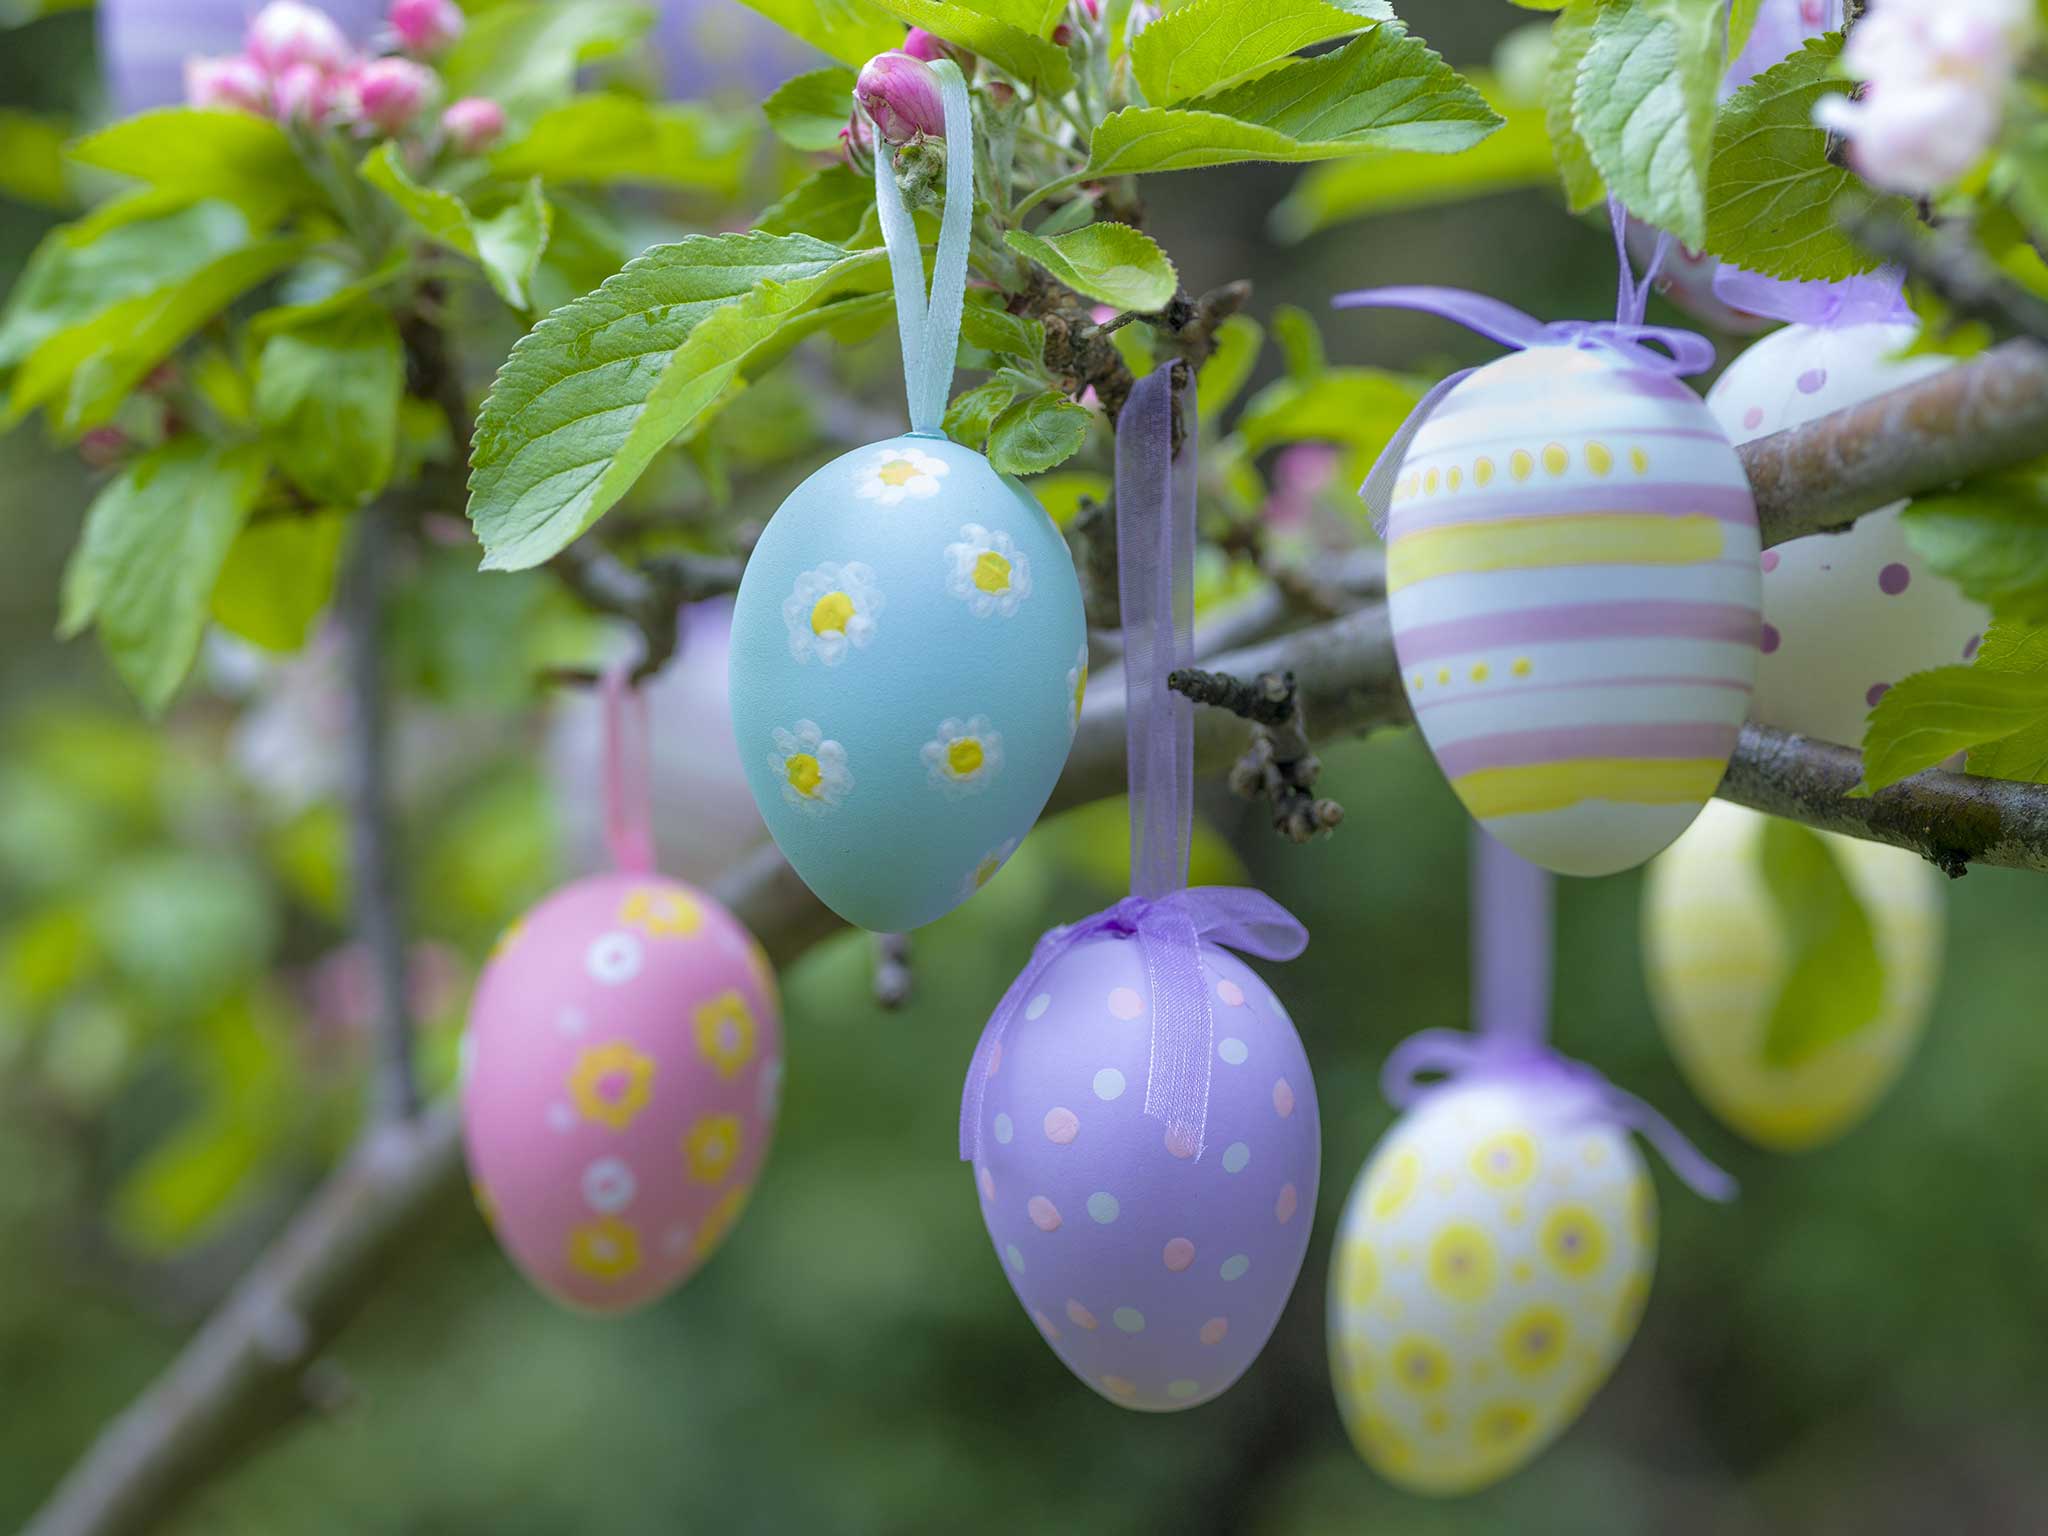 The date of Easter fluctuates depending on the calendars